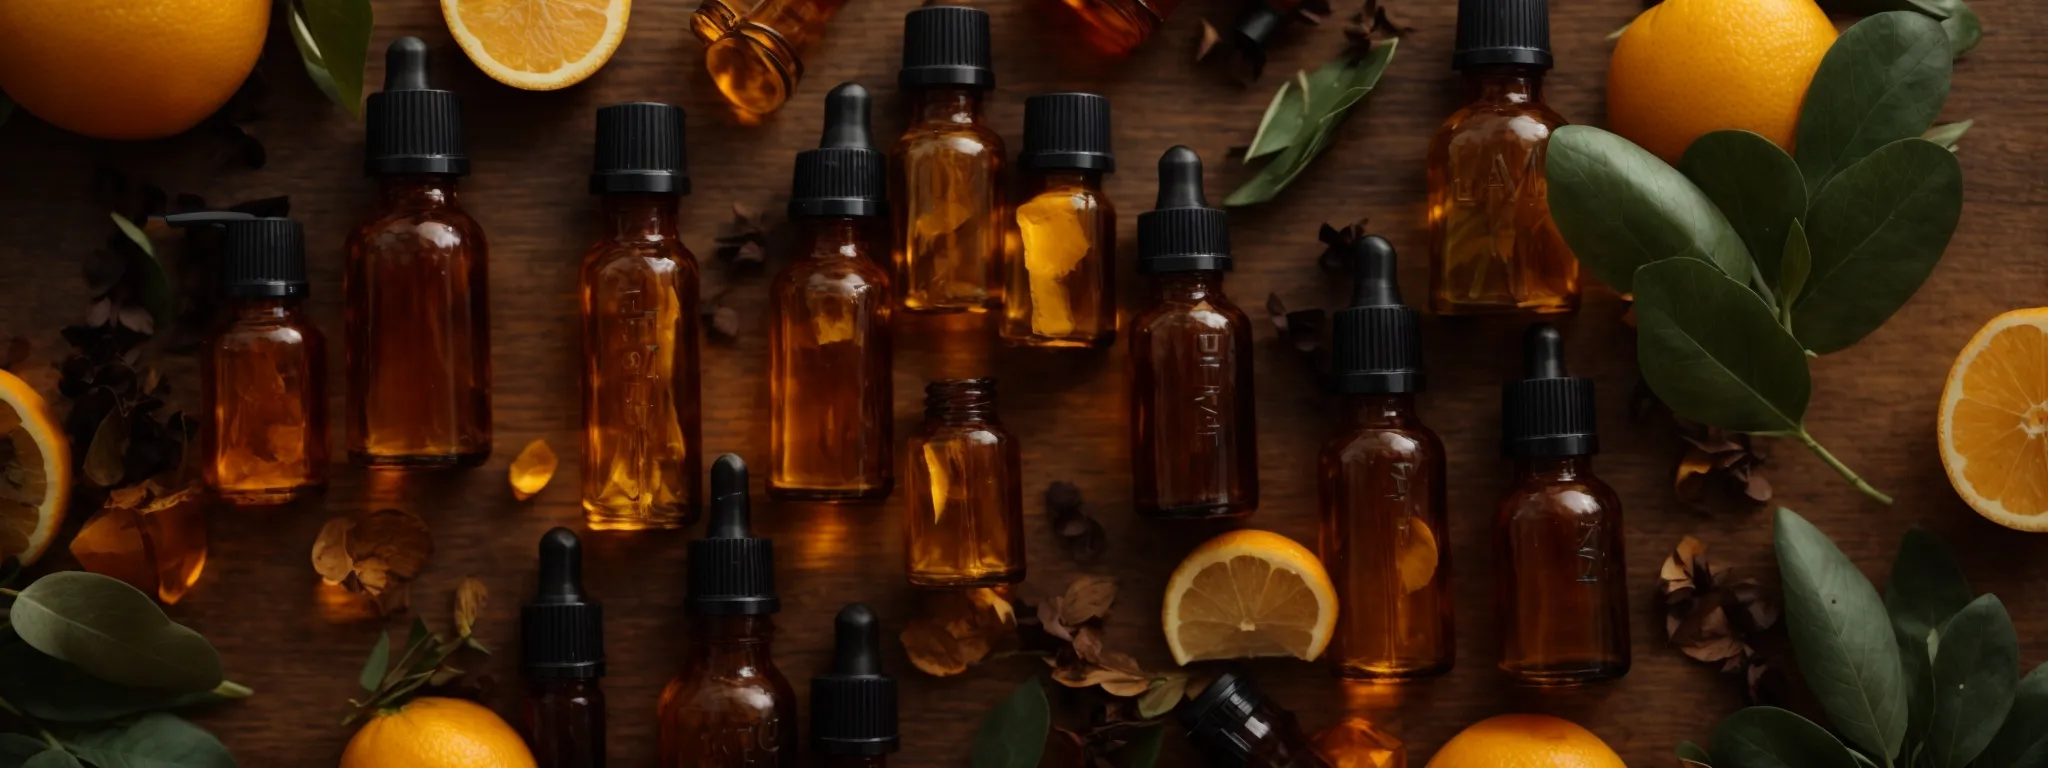 a collection of amber bottles with droppers, each labeled with different essential oil names, sits on a wooden surface surrounded by eucalyptus leaves and citrus slices.